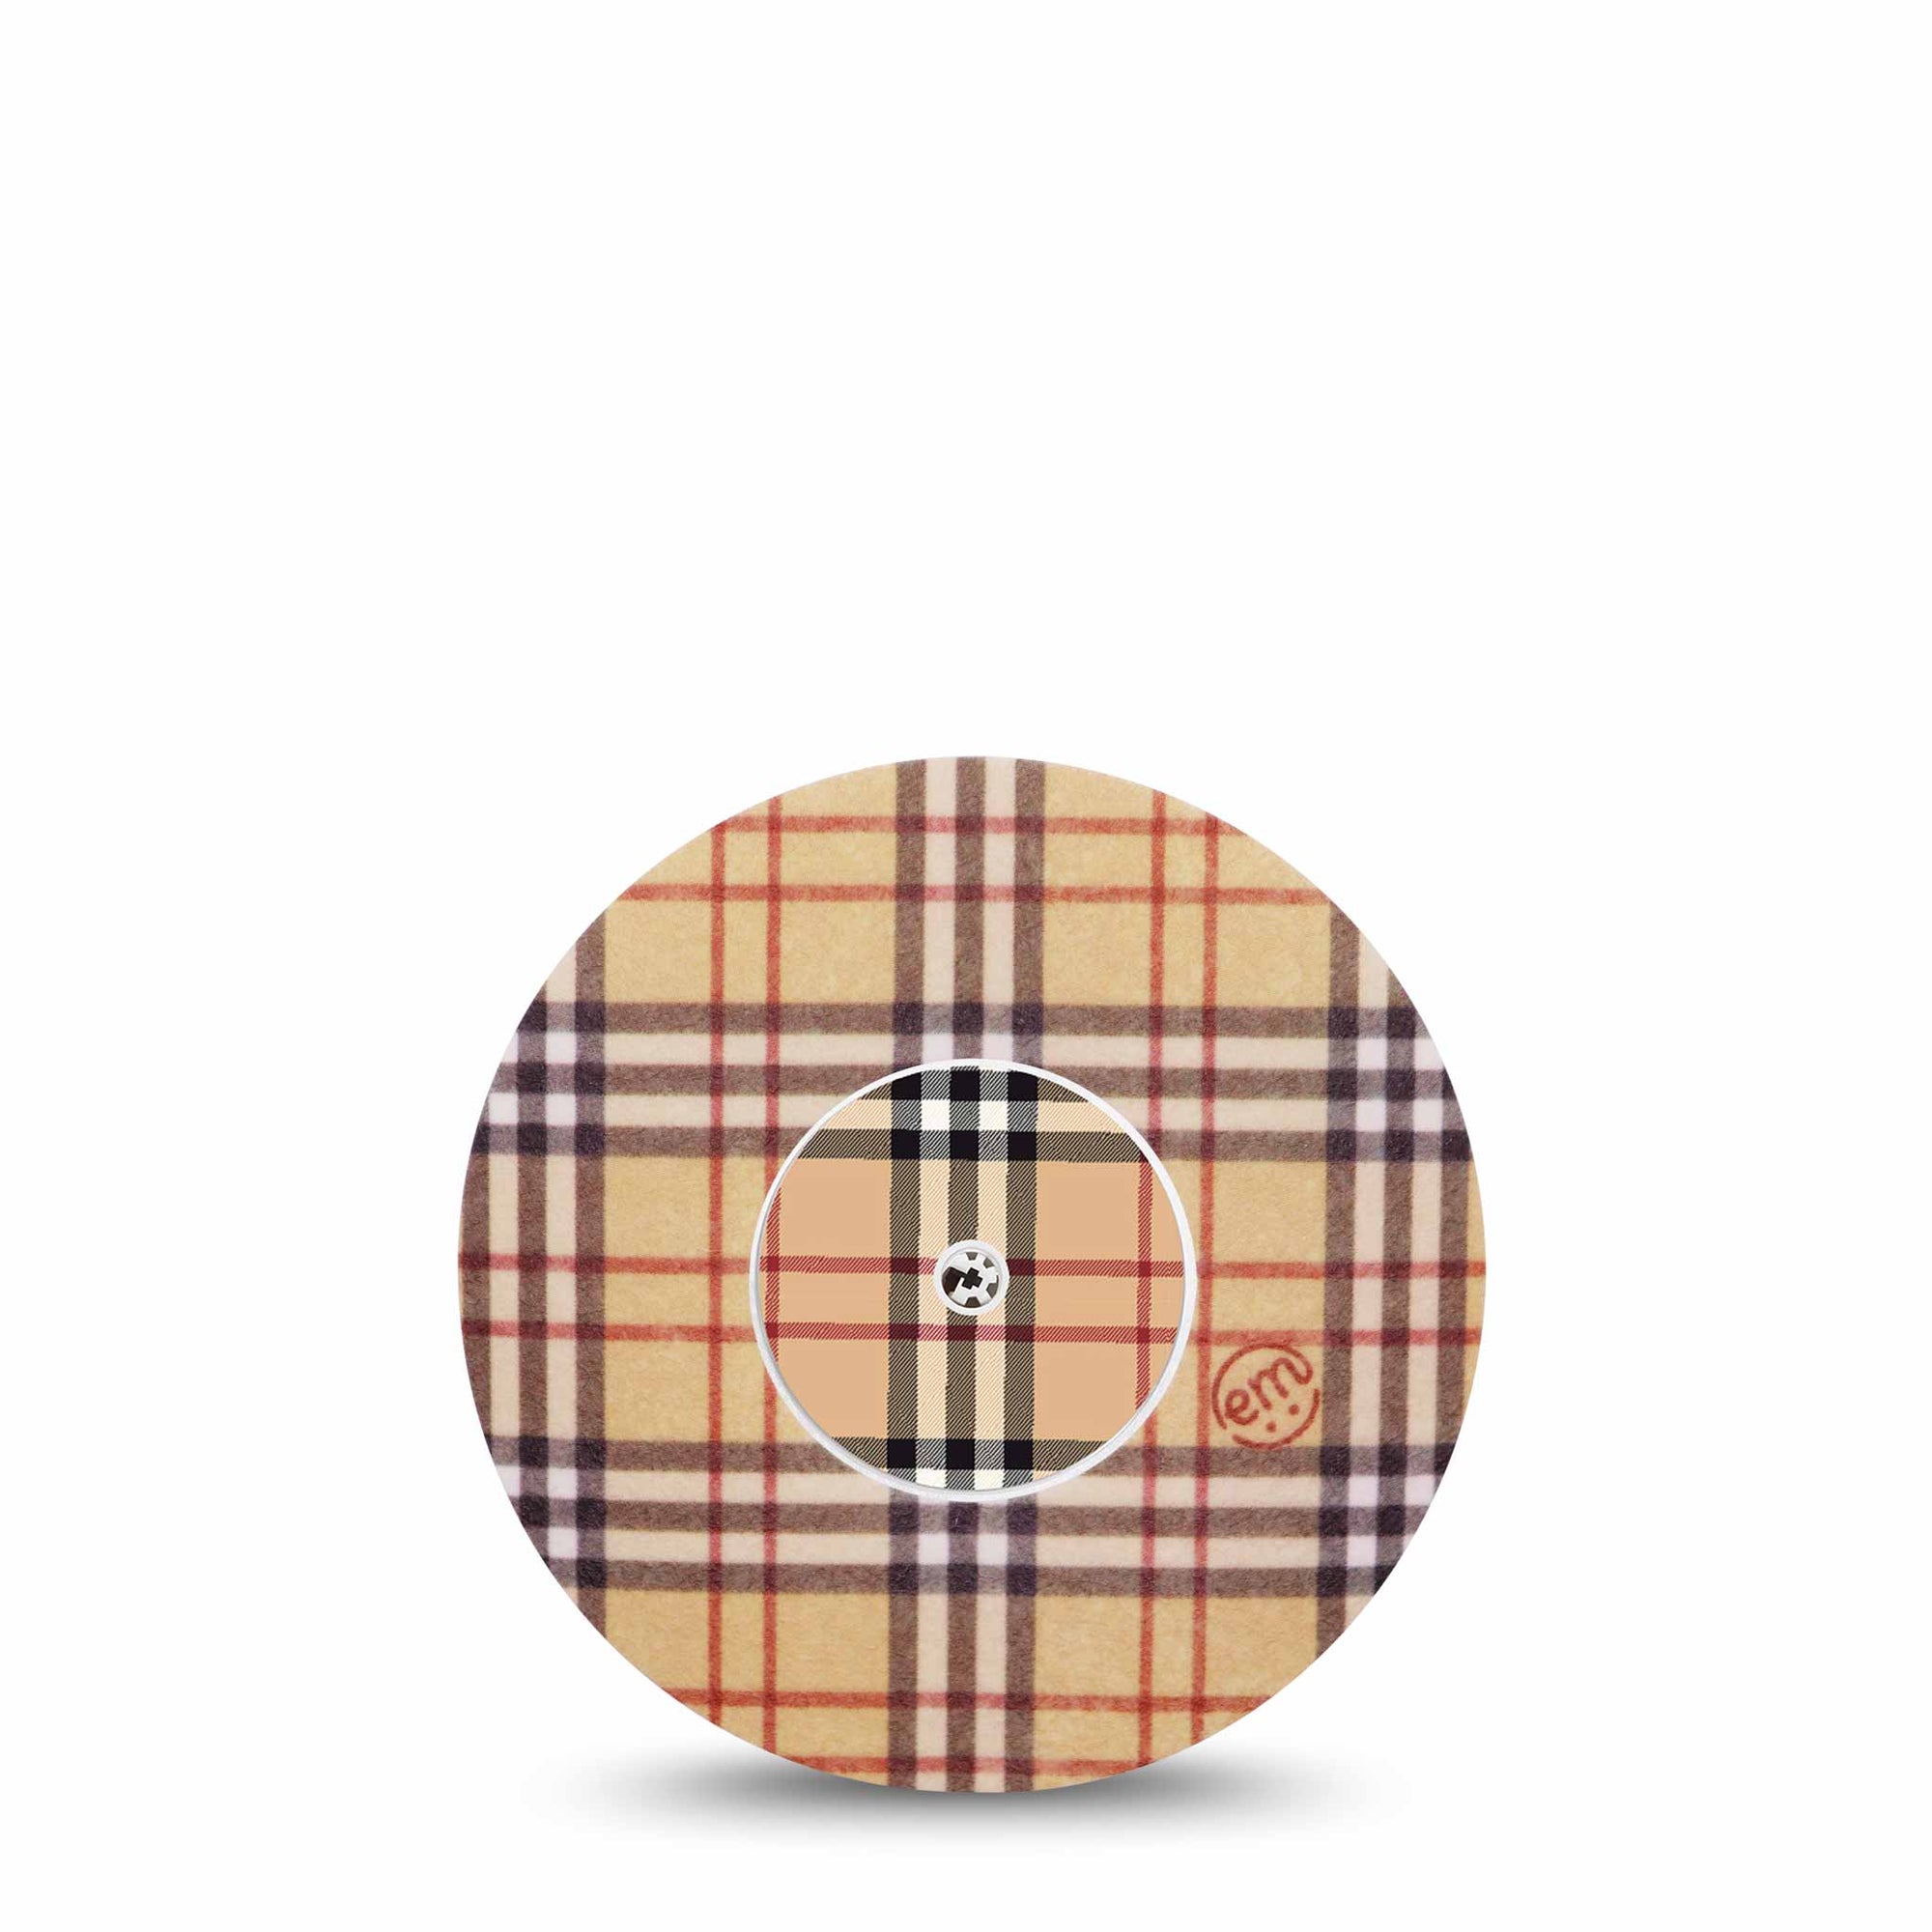 ExpressionMed Plaid and Bougie Libre Transmitter Sticker with Tape